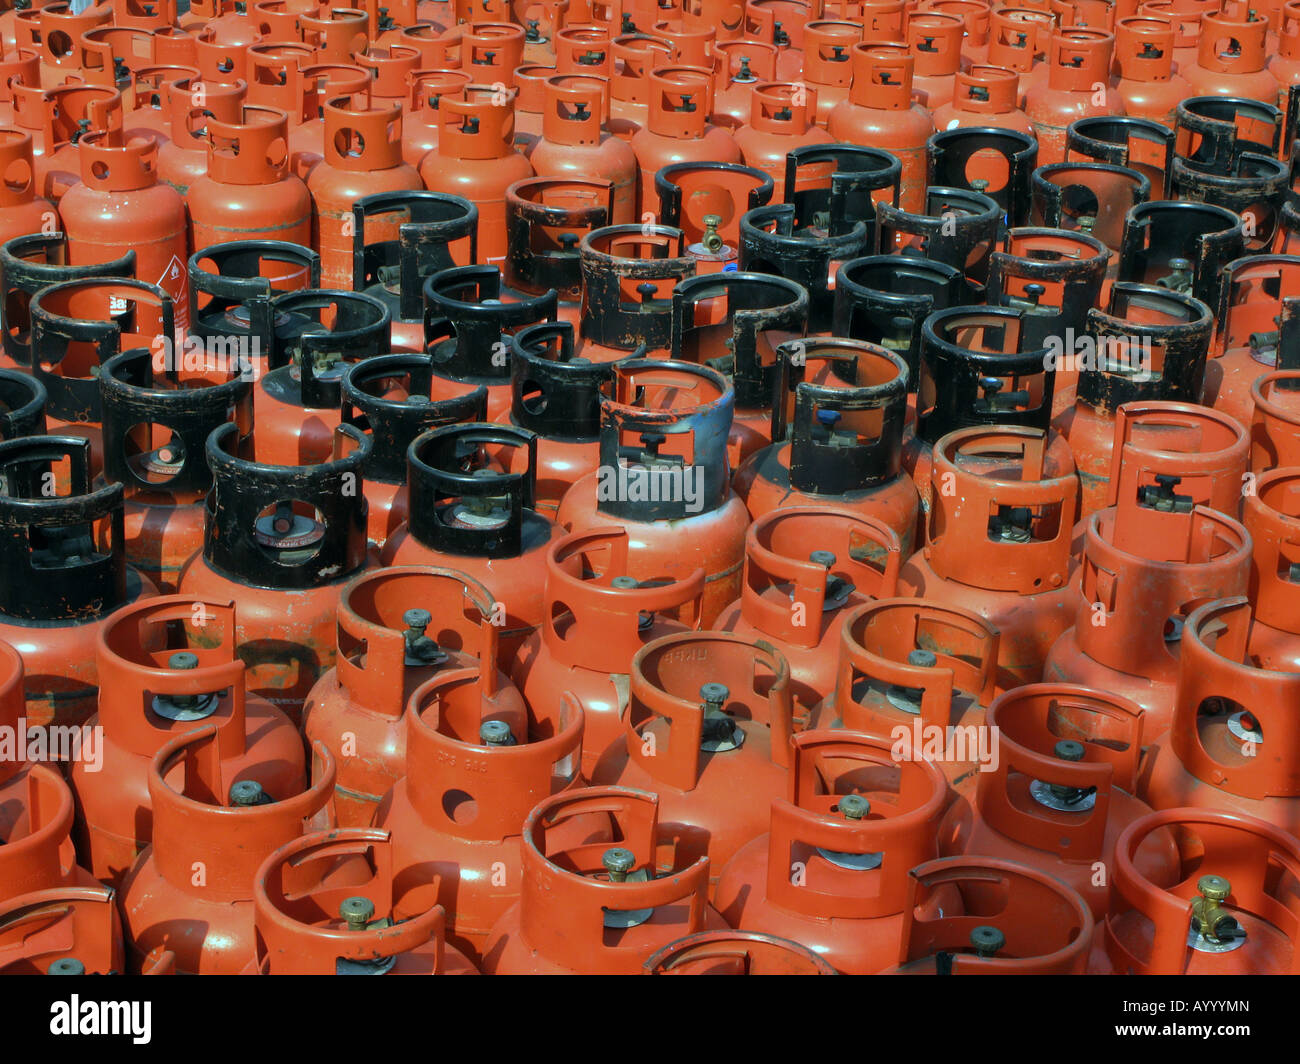 UK CALOR GAS BOTTLES IN A DEPOT IN TOWER HAMLETS LONDON ENGLAND Photo Julio Etchart Stock Photo